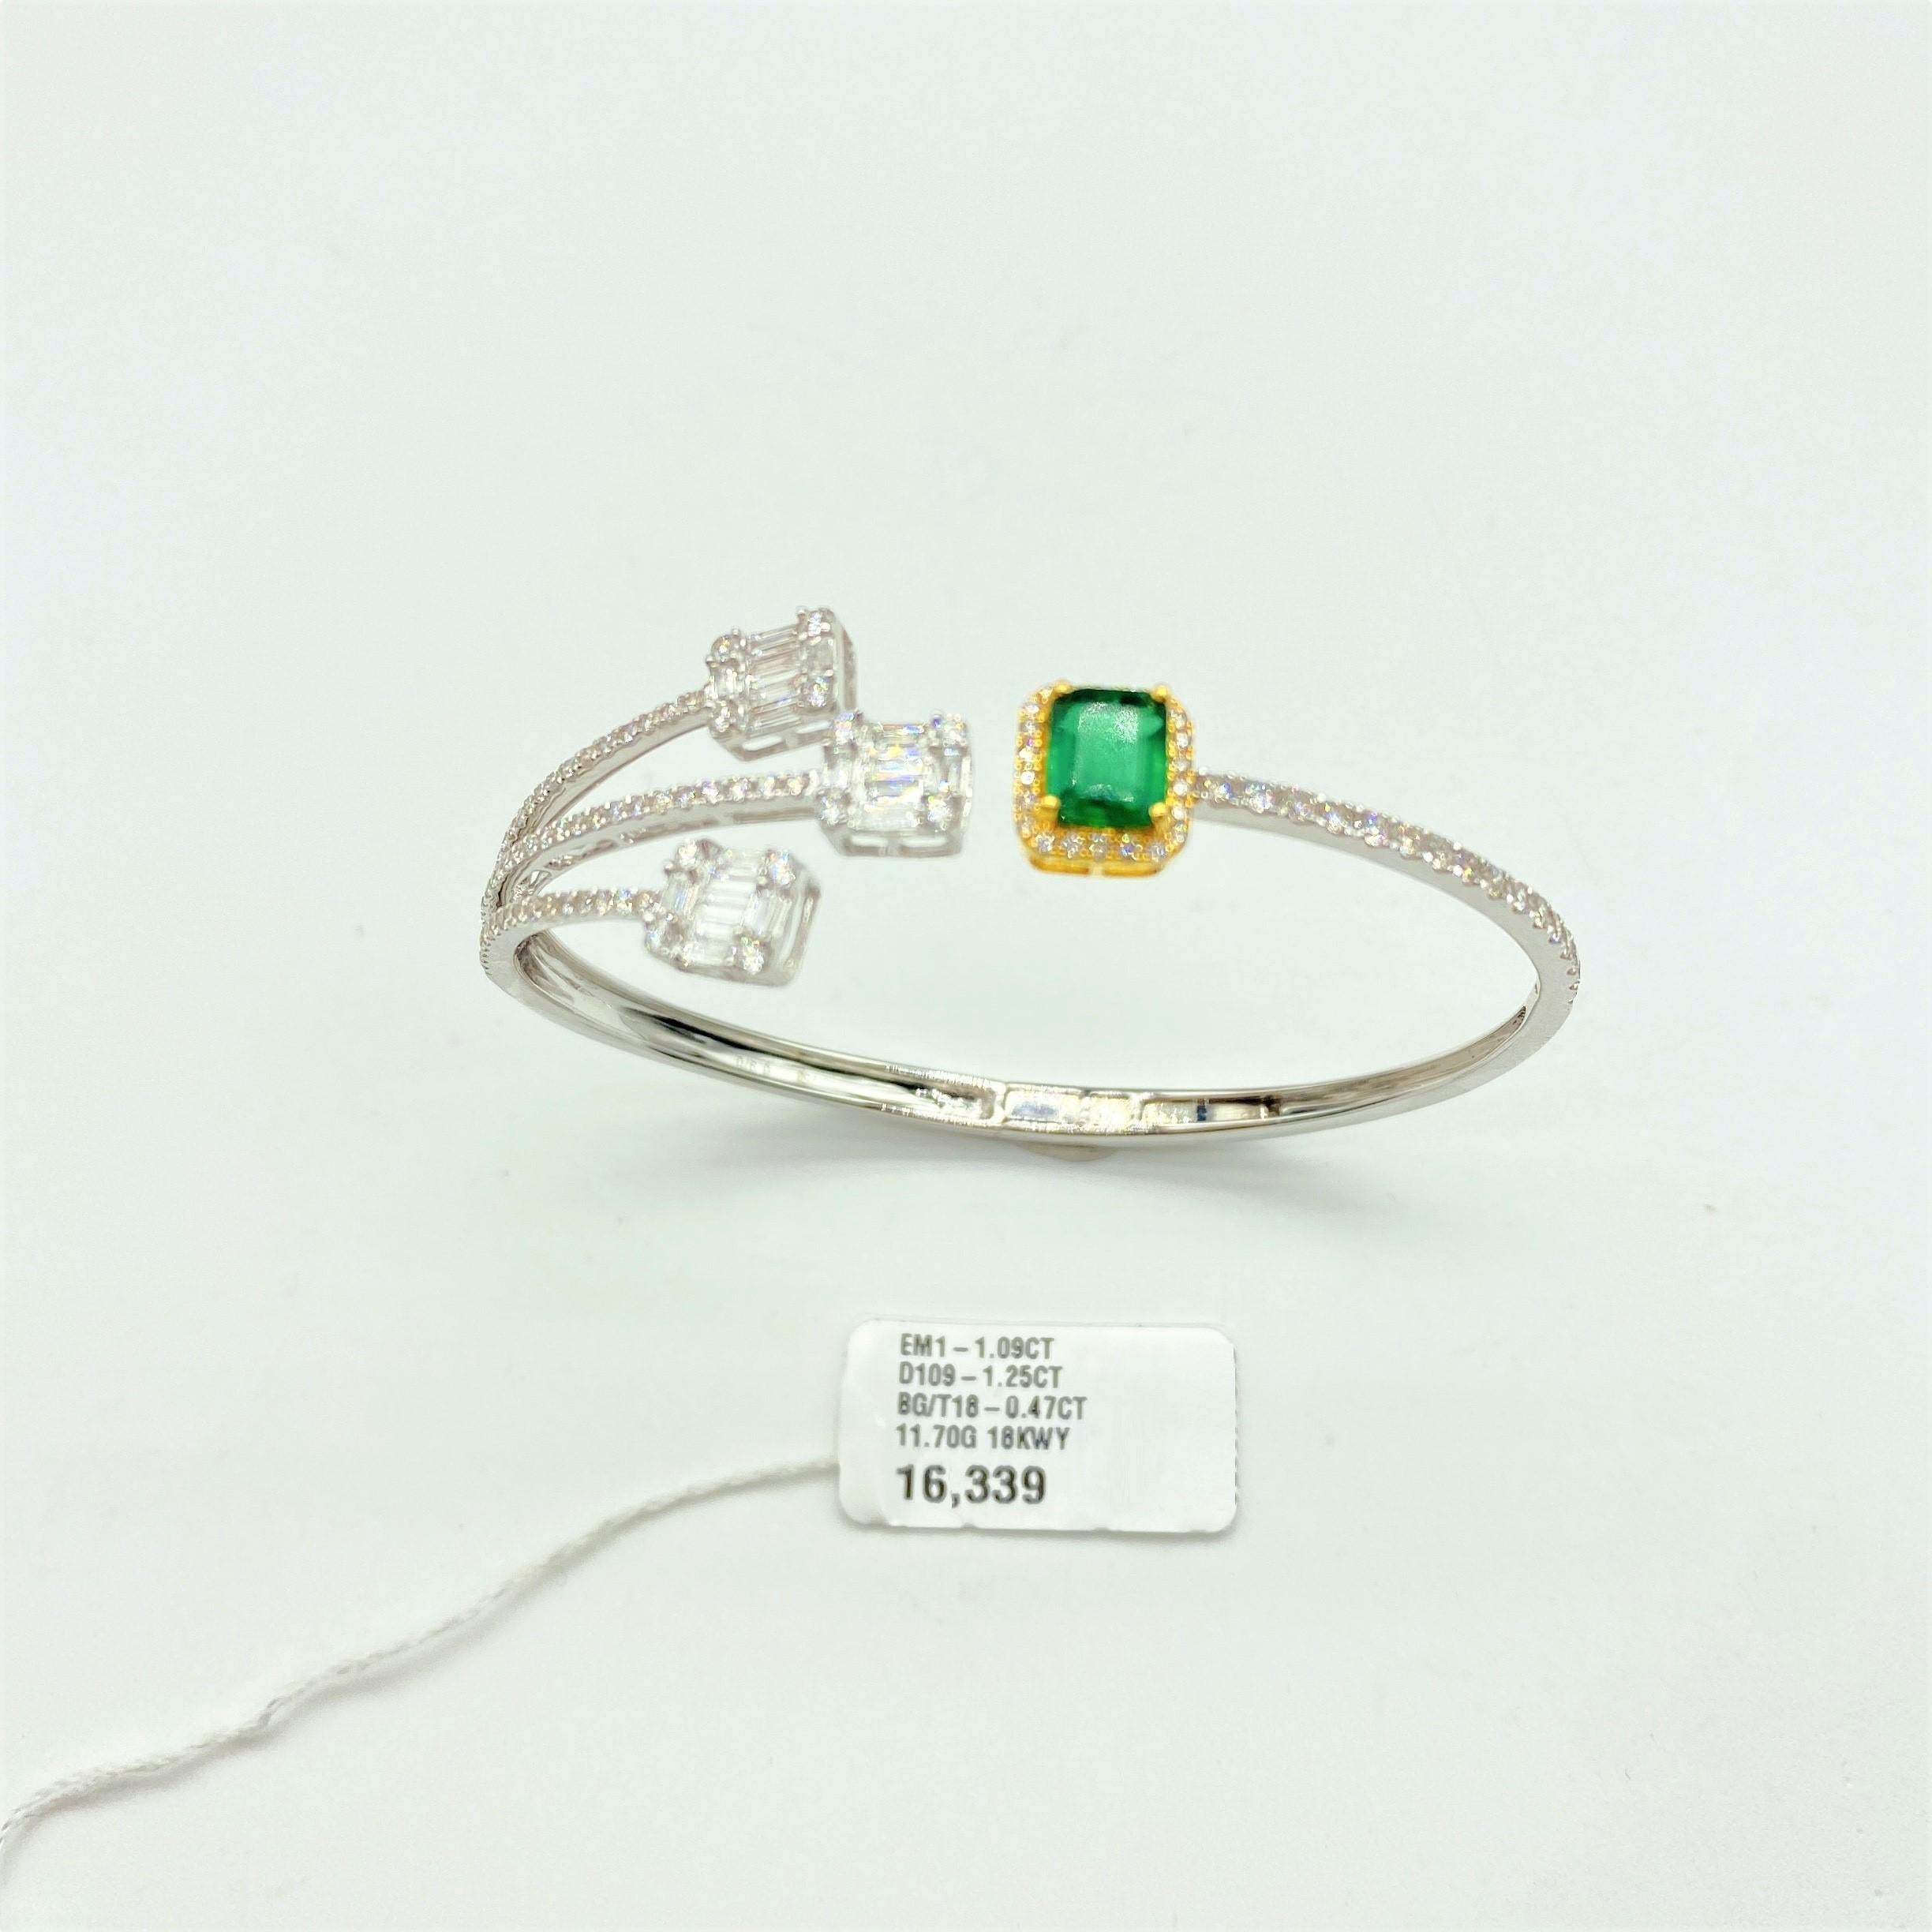 NWT $16, 399 18KT Gold Glittering Fancy Green Emerald Diamond Bangle Bracelet In New Condition For Sale In New York, NY